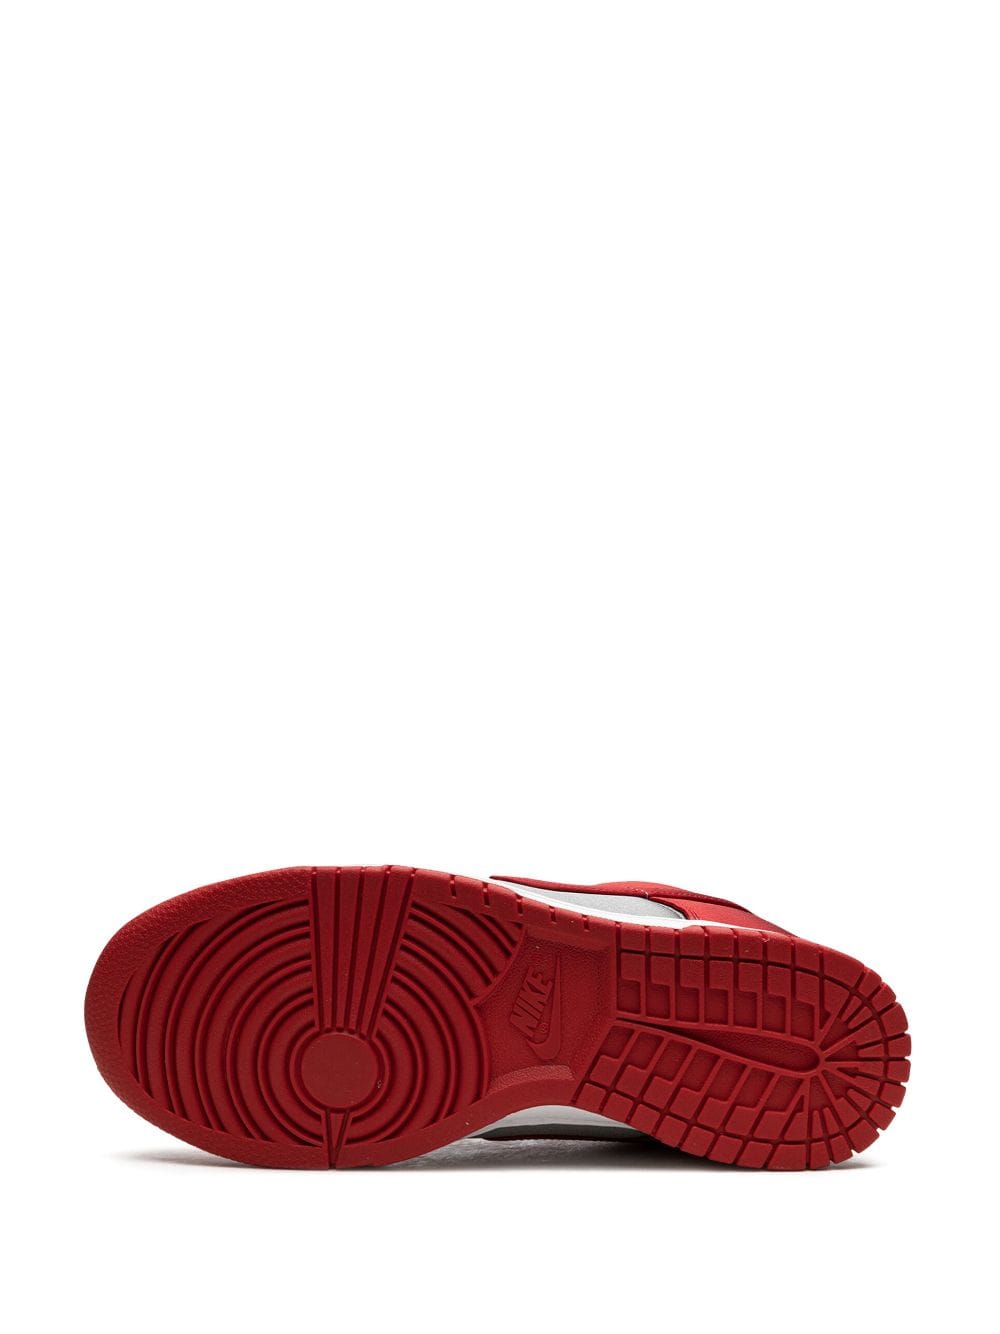 Nike Dunk Low "Unlv Satin" sneakers Red